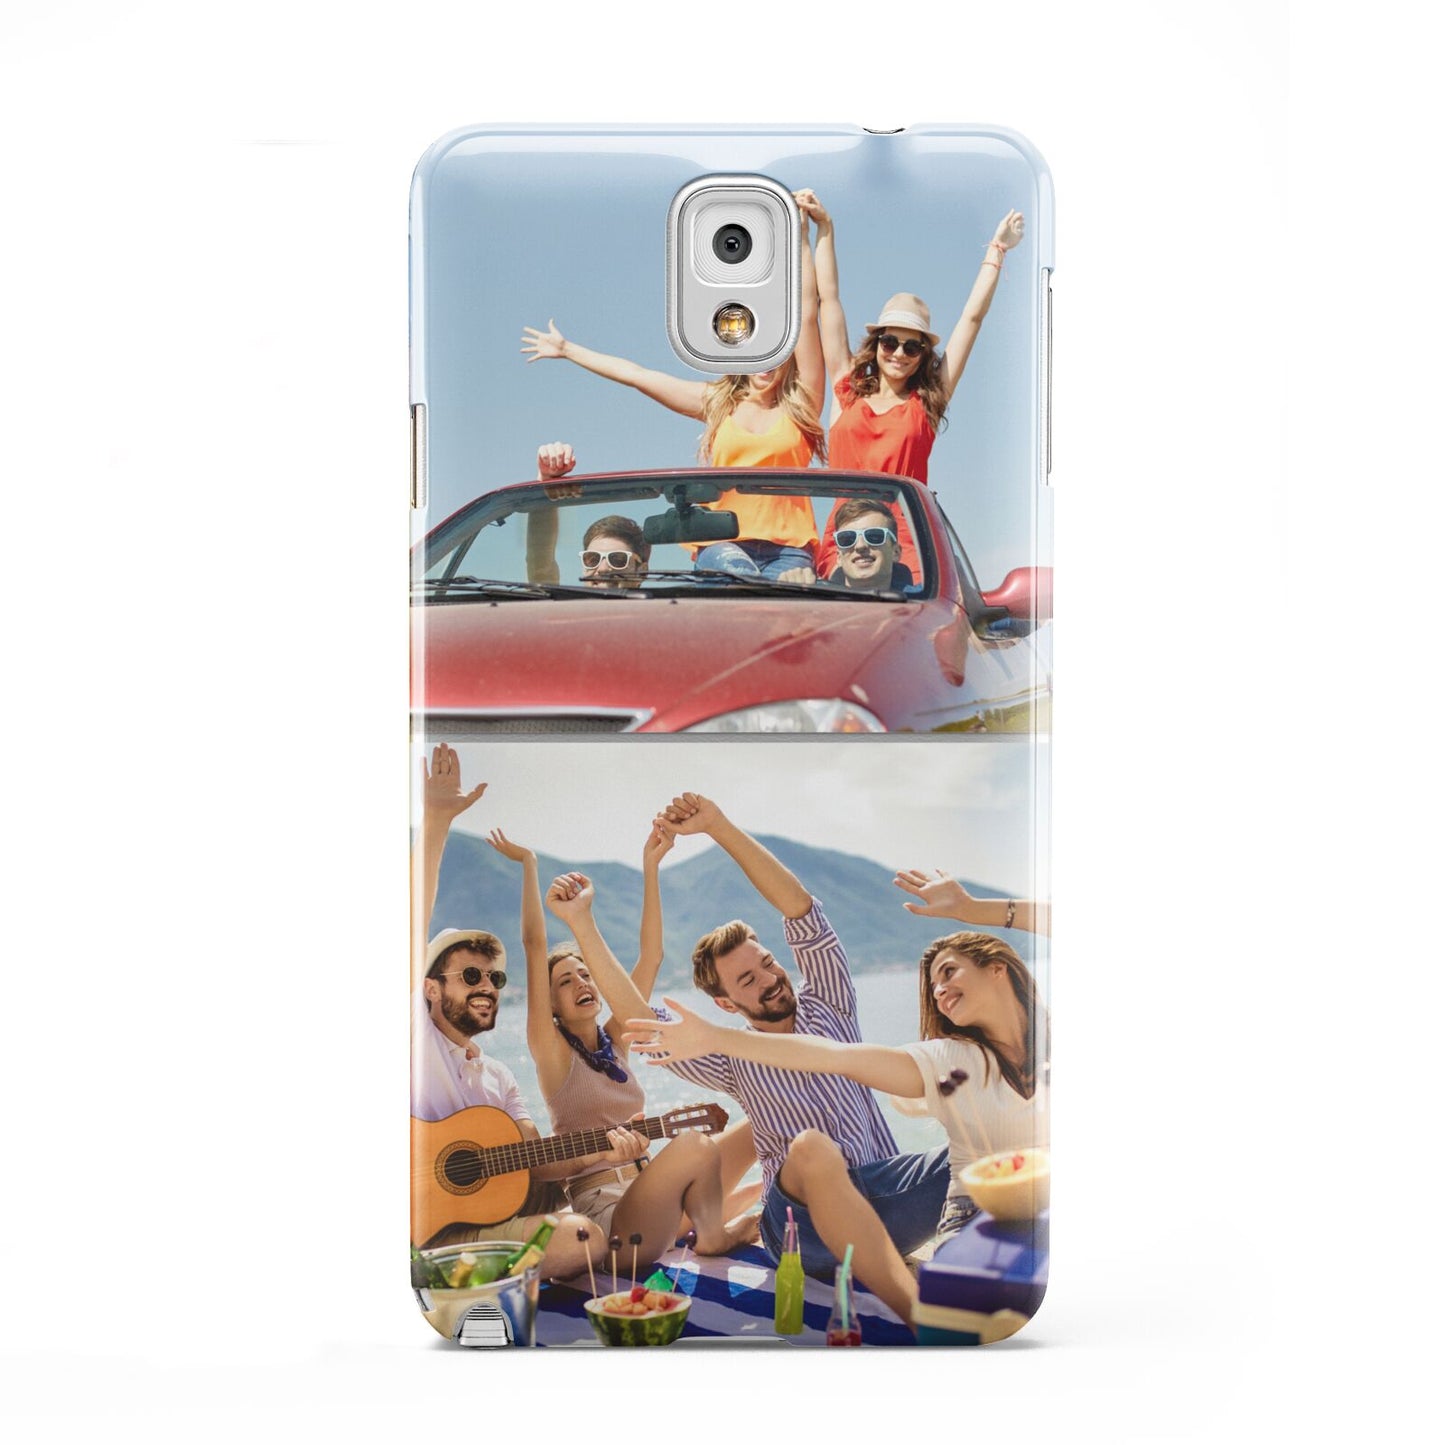 Two Photo Samsung Galaxy Note 3 Case